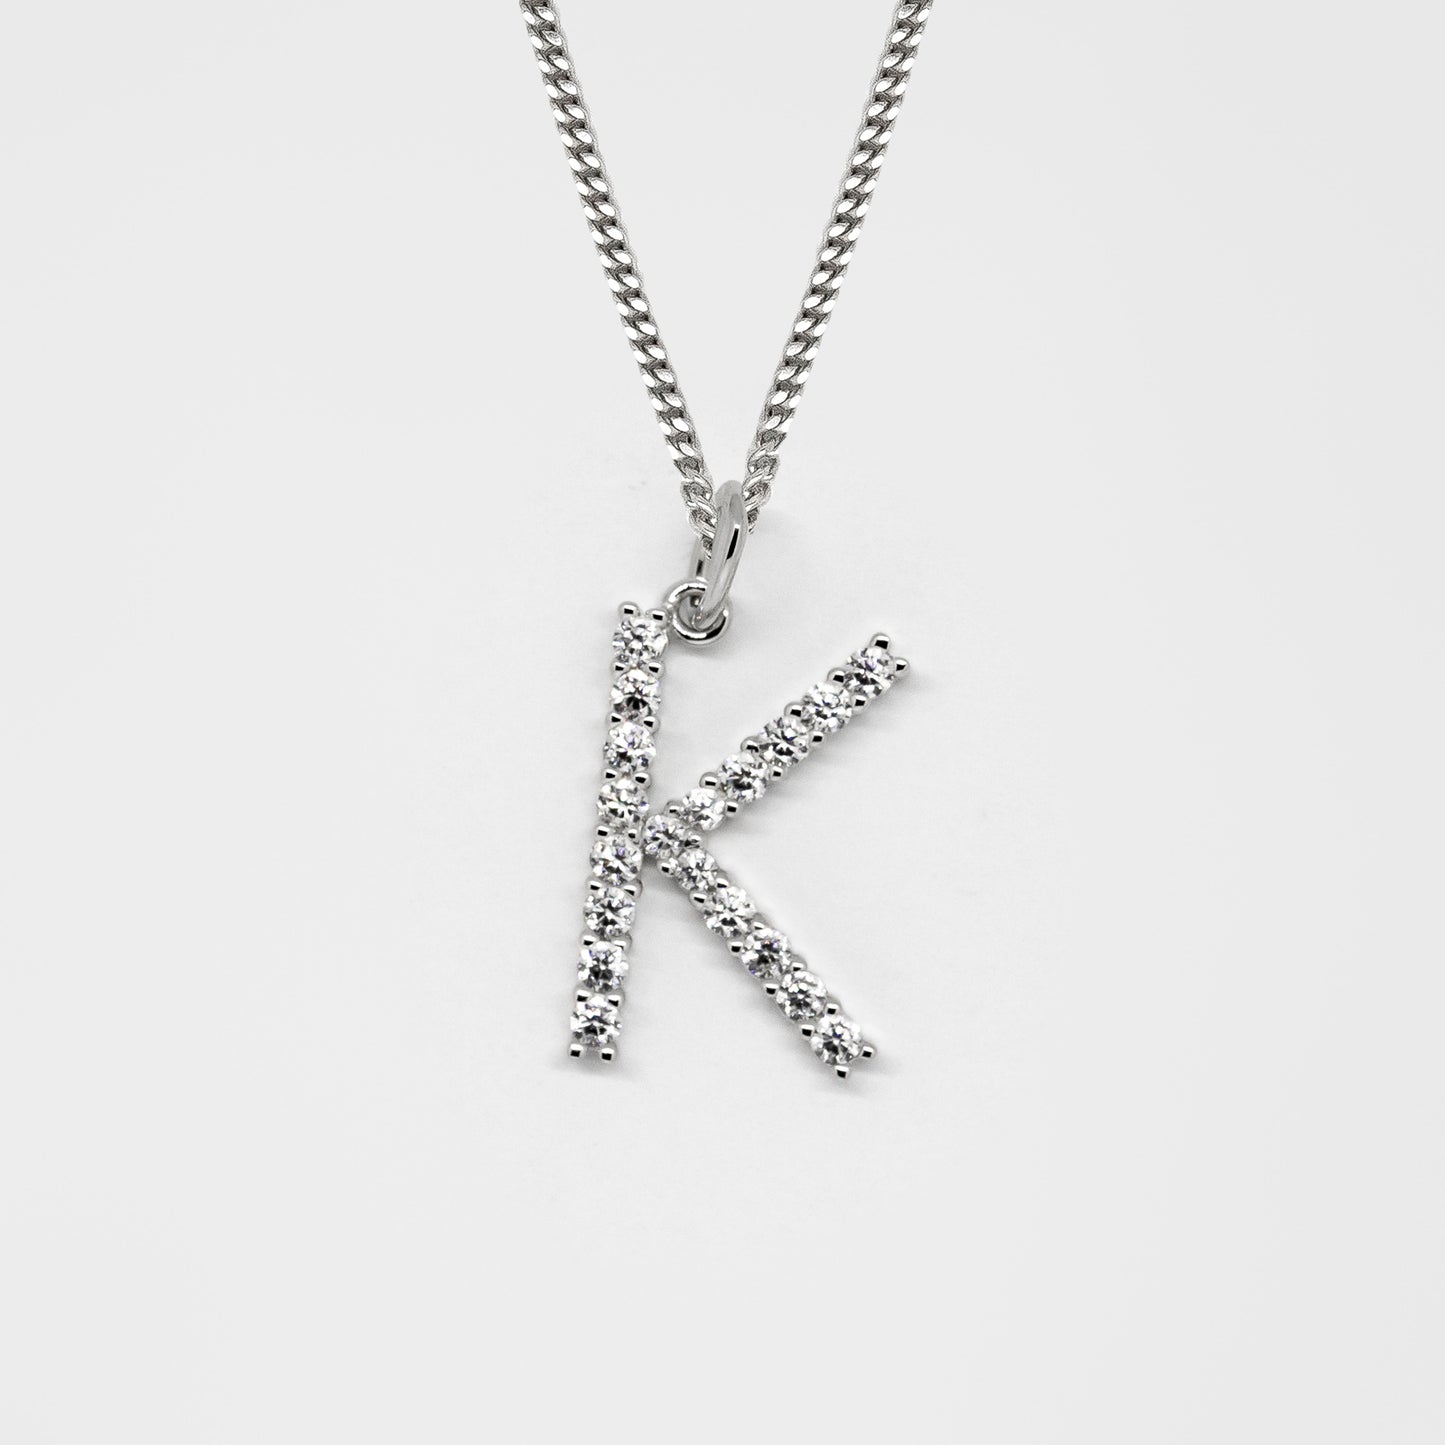 Silver 925 Initial Necklace - K